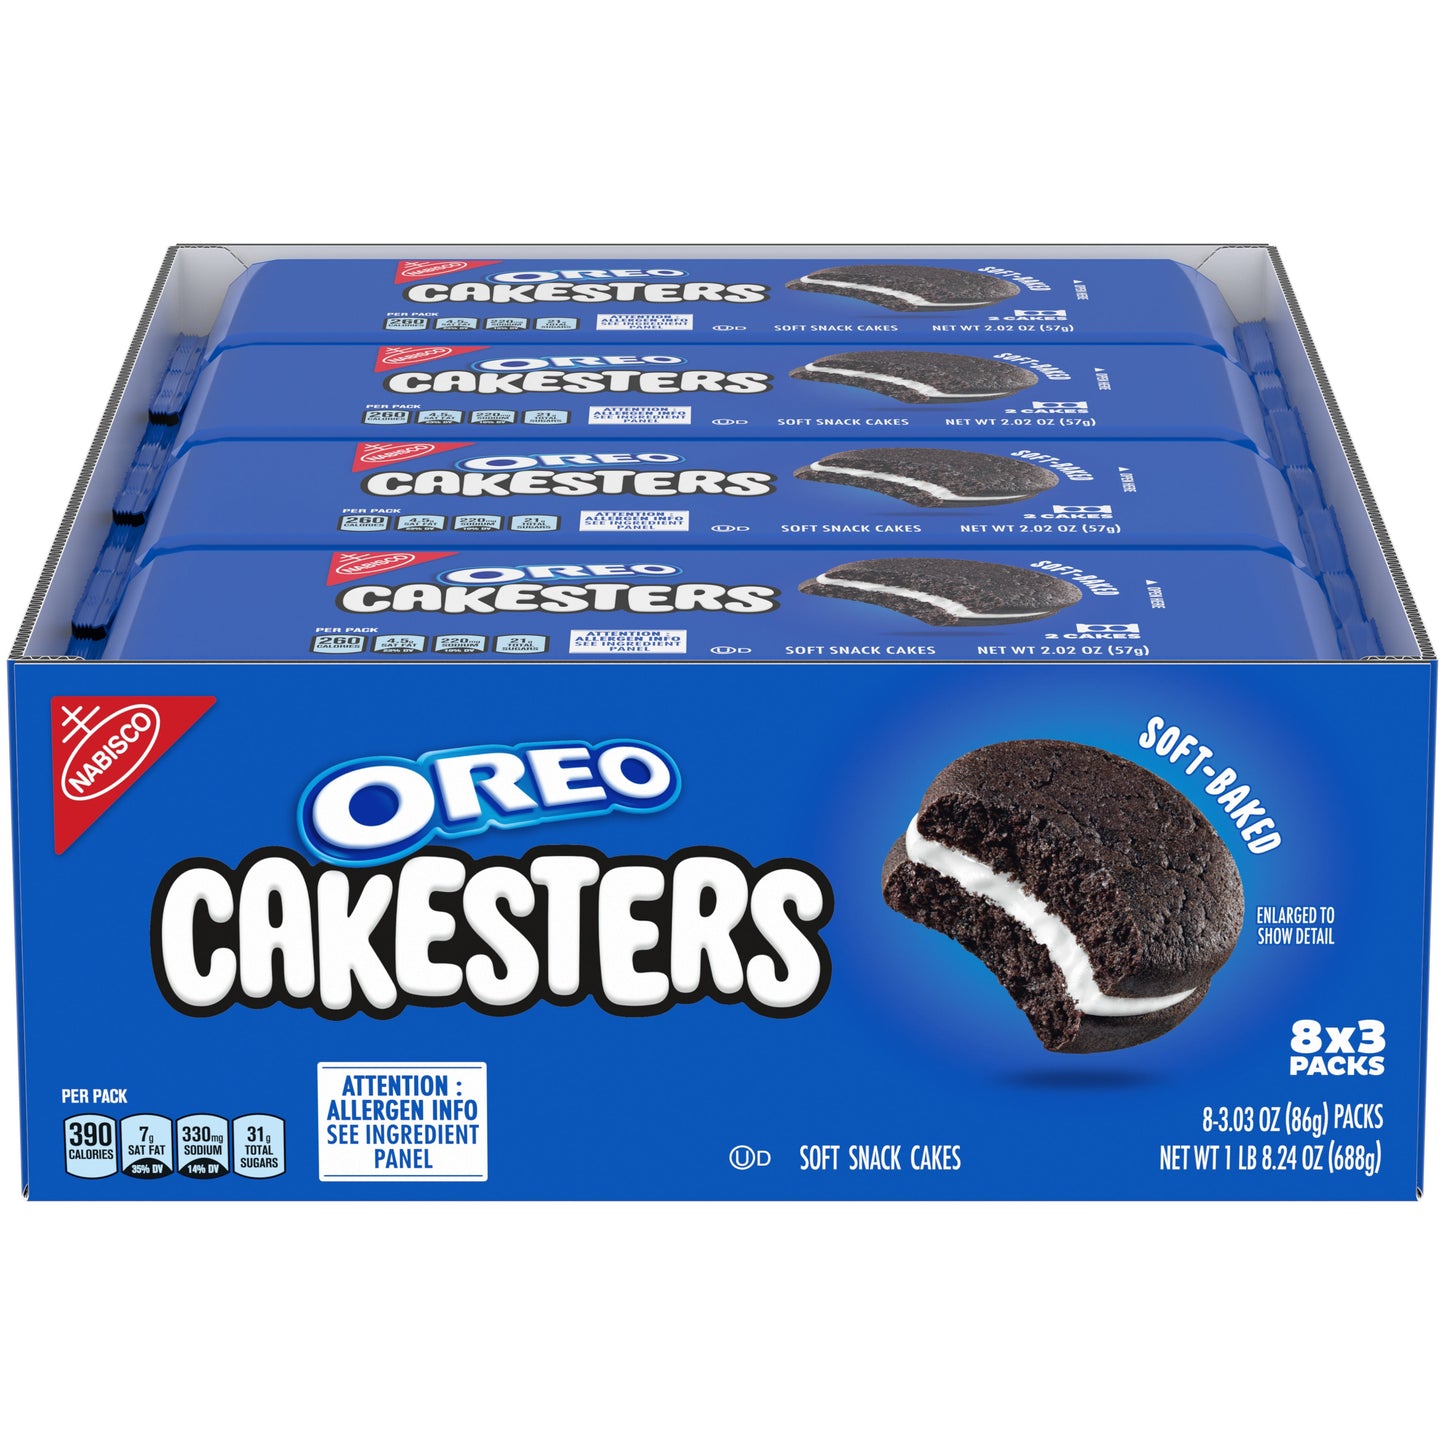 Oreo Cakesters 3-pack 3.03oz 8ct